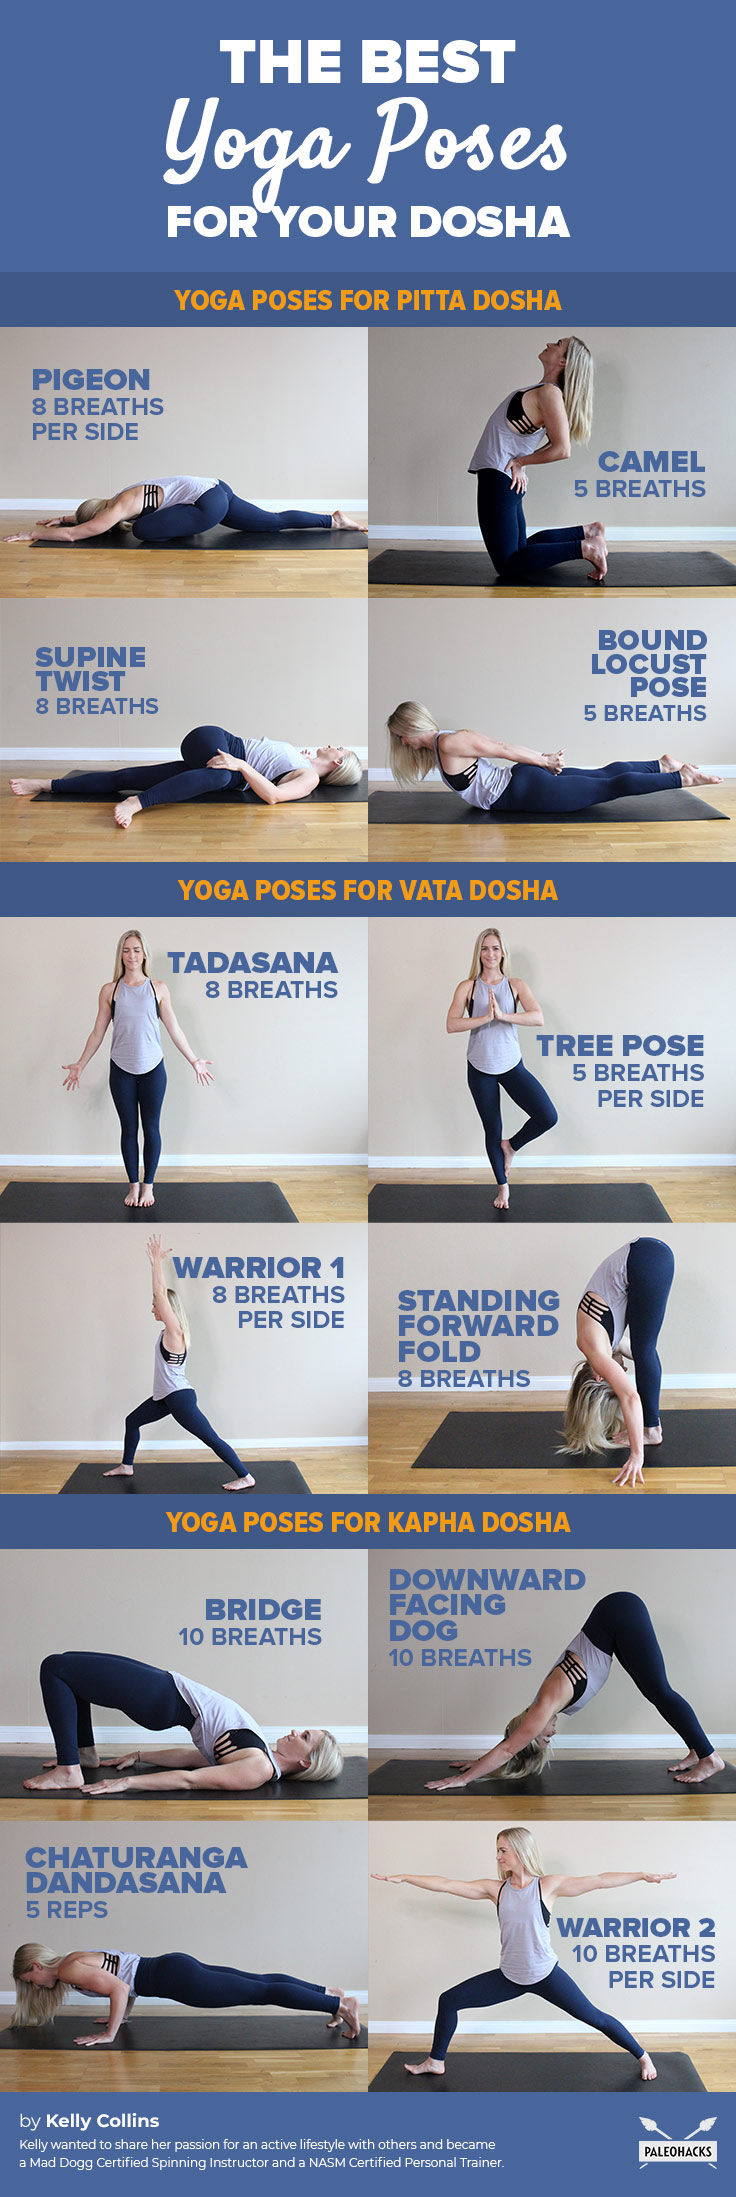 Here’s how you can use this ancient practice during yoga to identify your “dosha” and bring your body’s energy back into alignment.